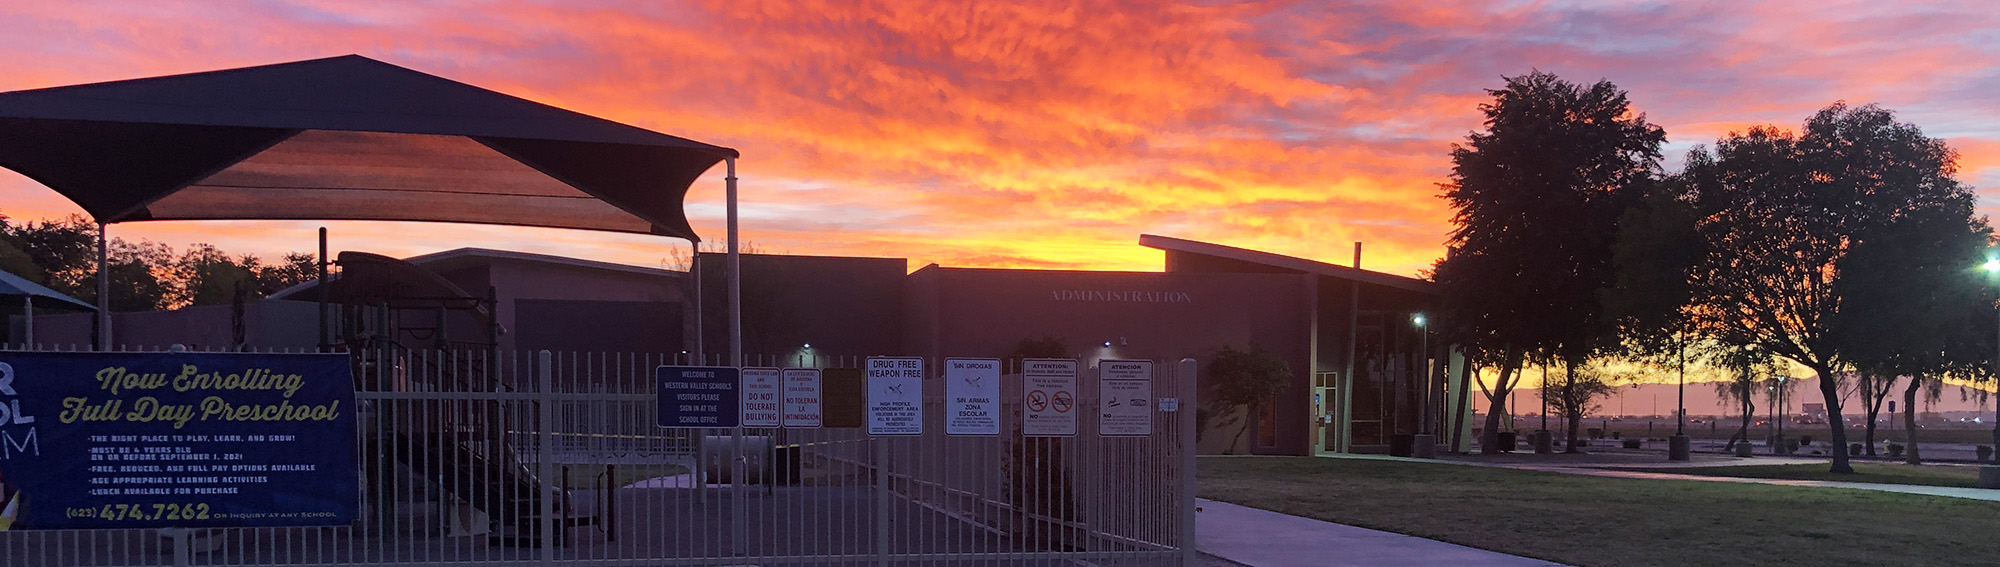 A beautiful sun set over Western Valley Elementary School campus